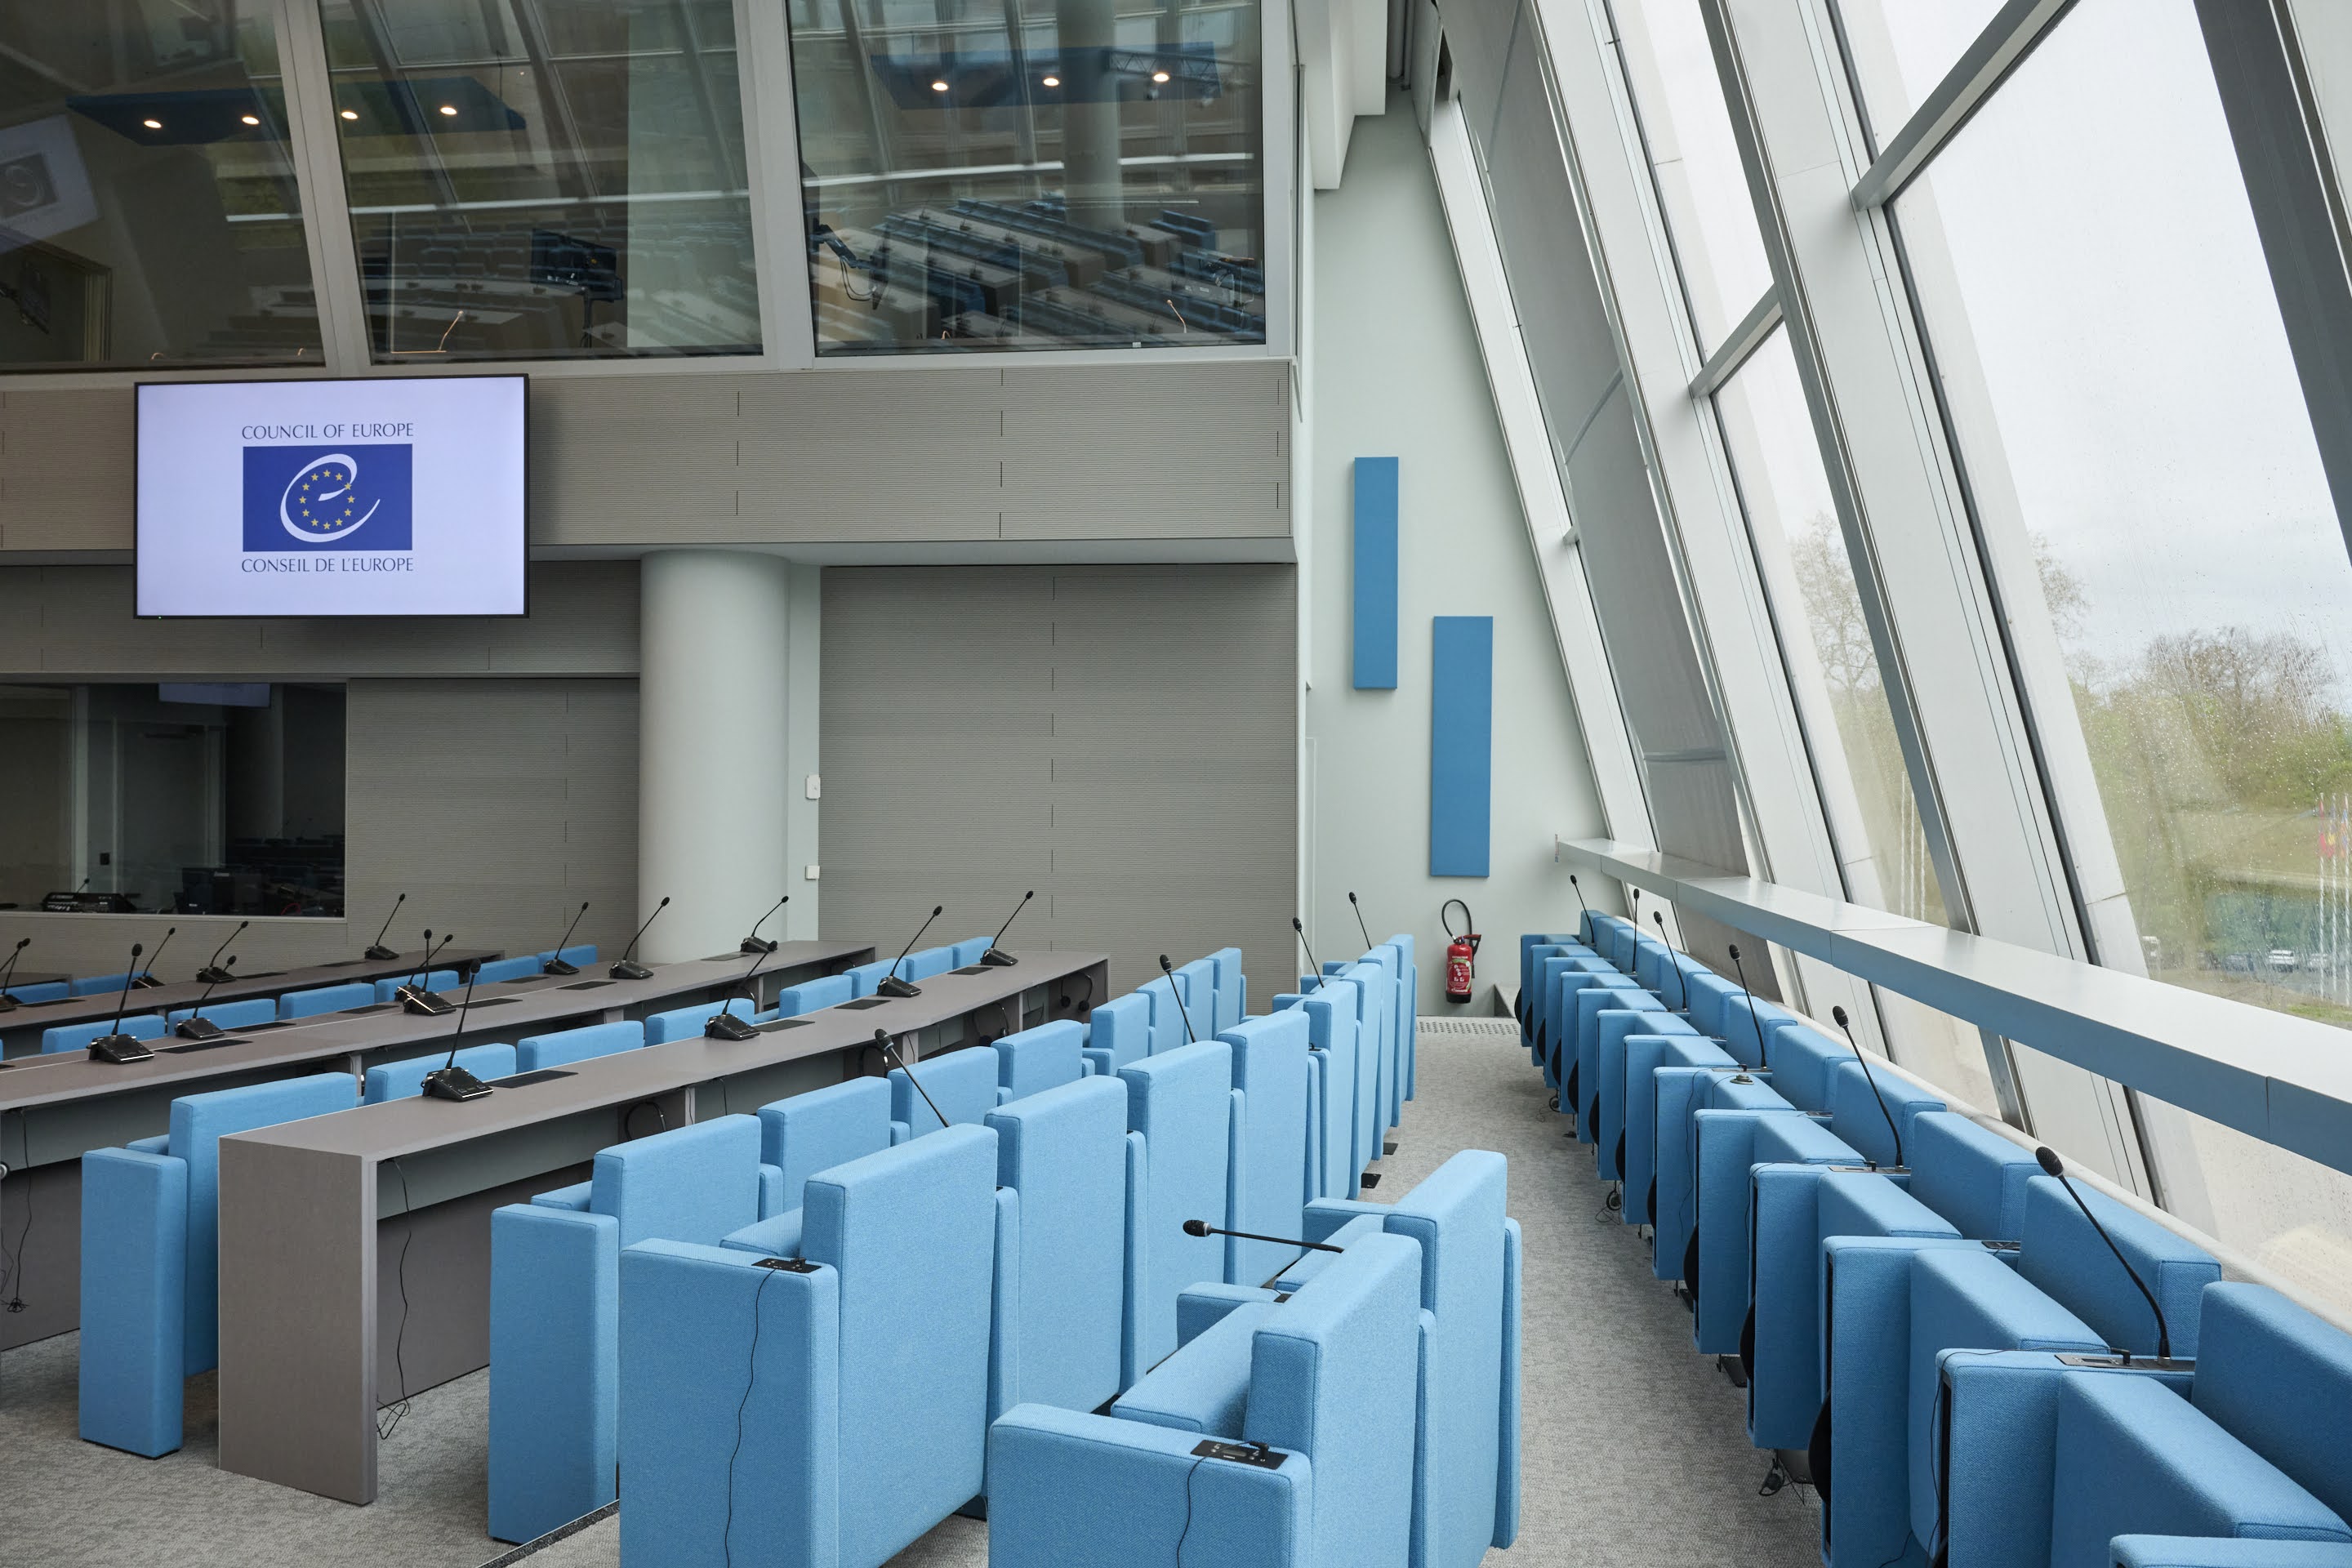 Room 1 of the European Council in Strasbourg